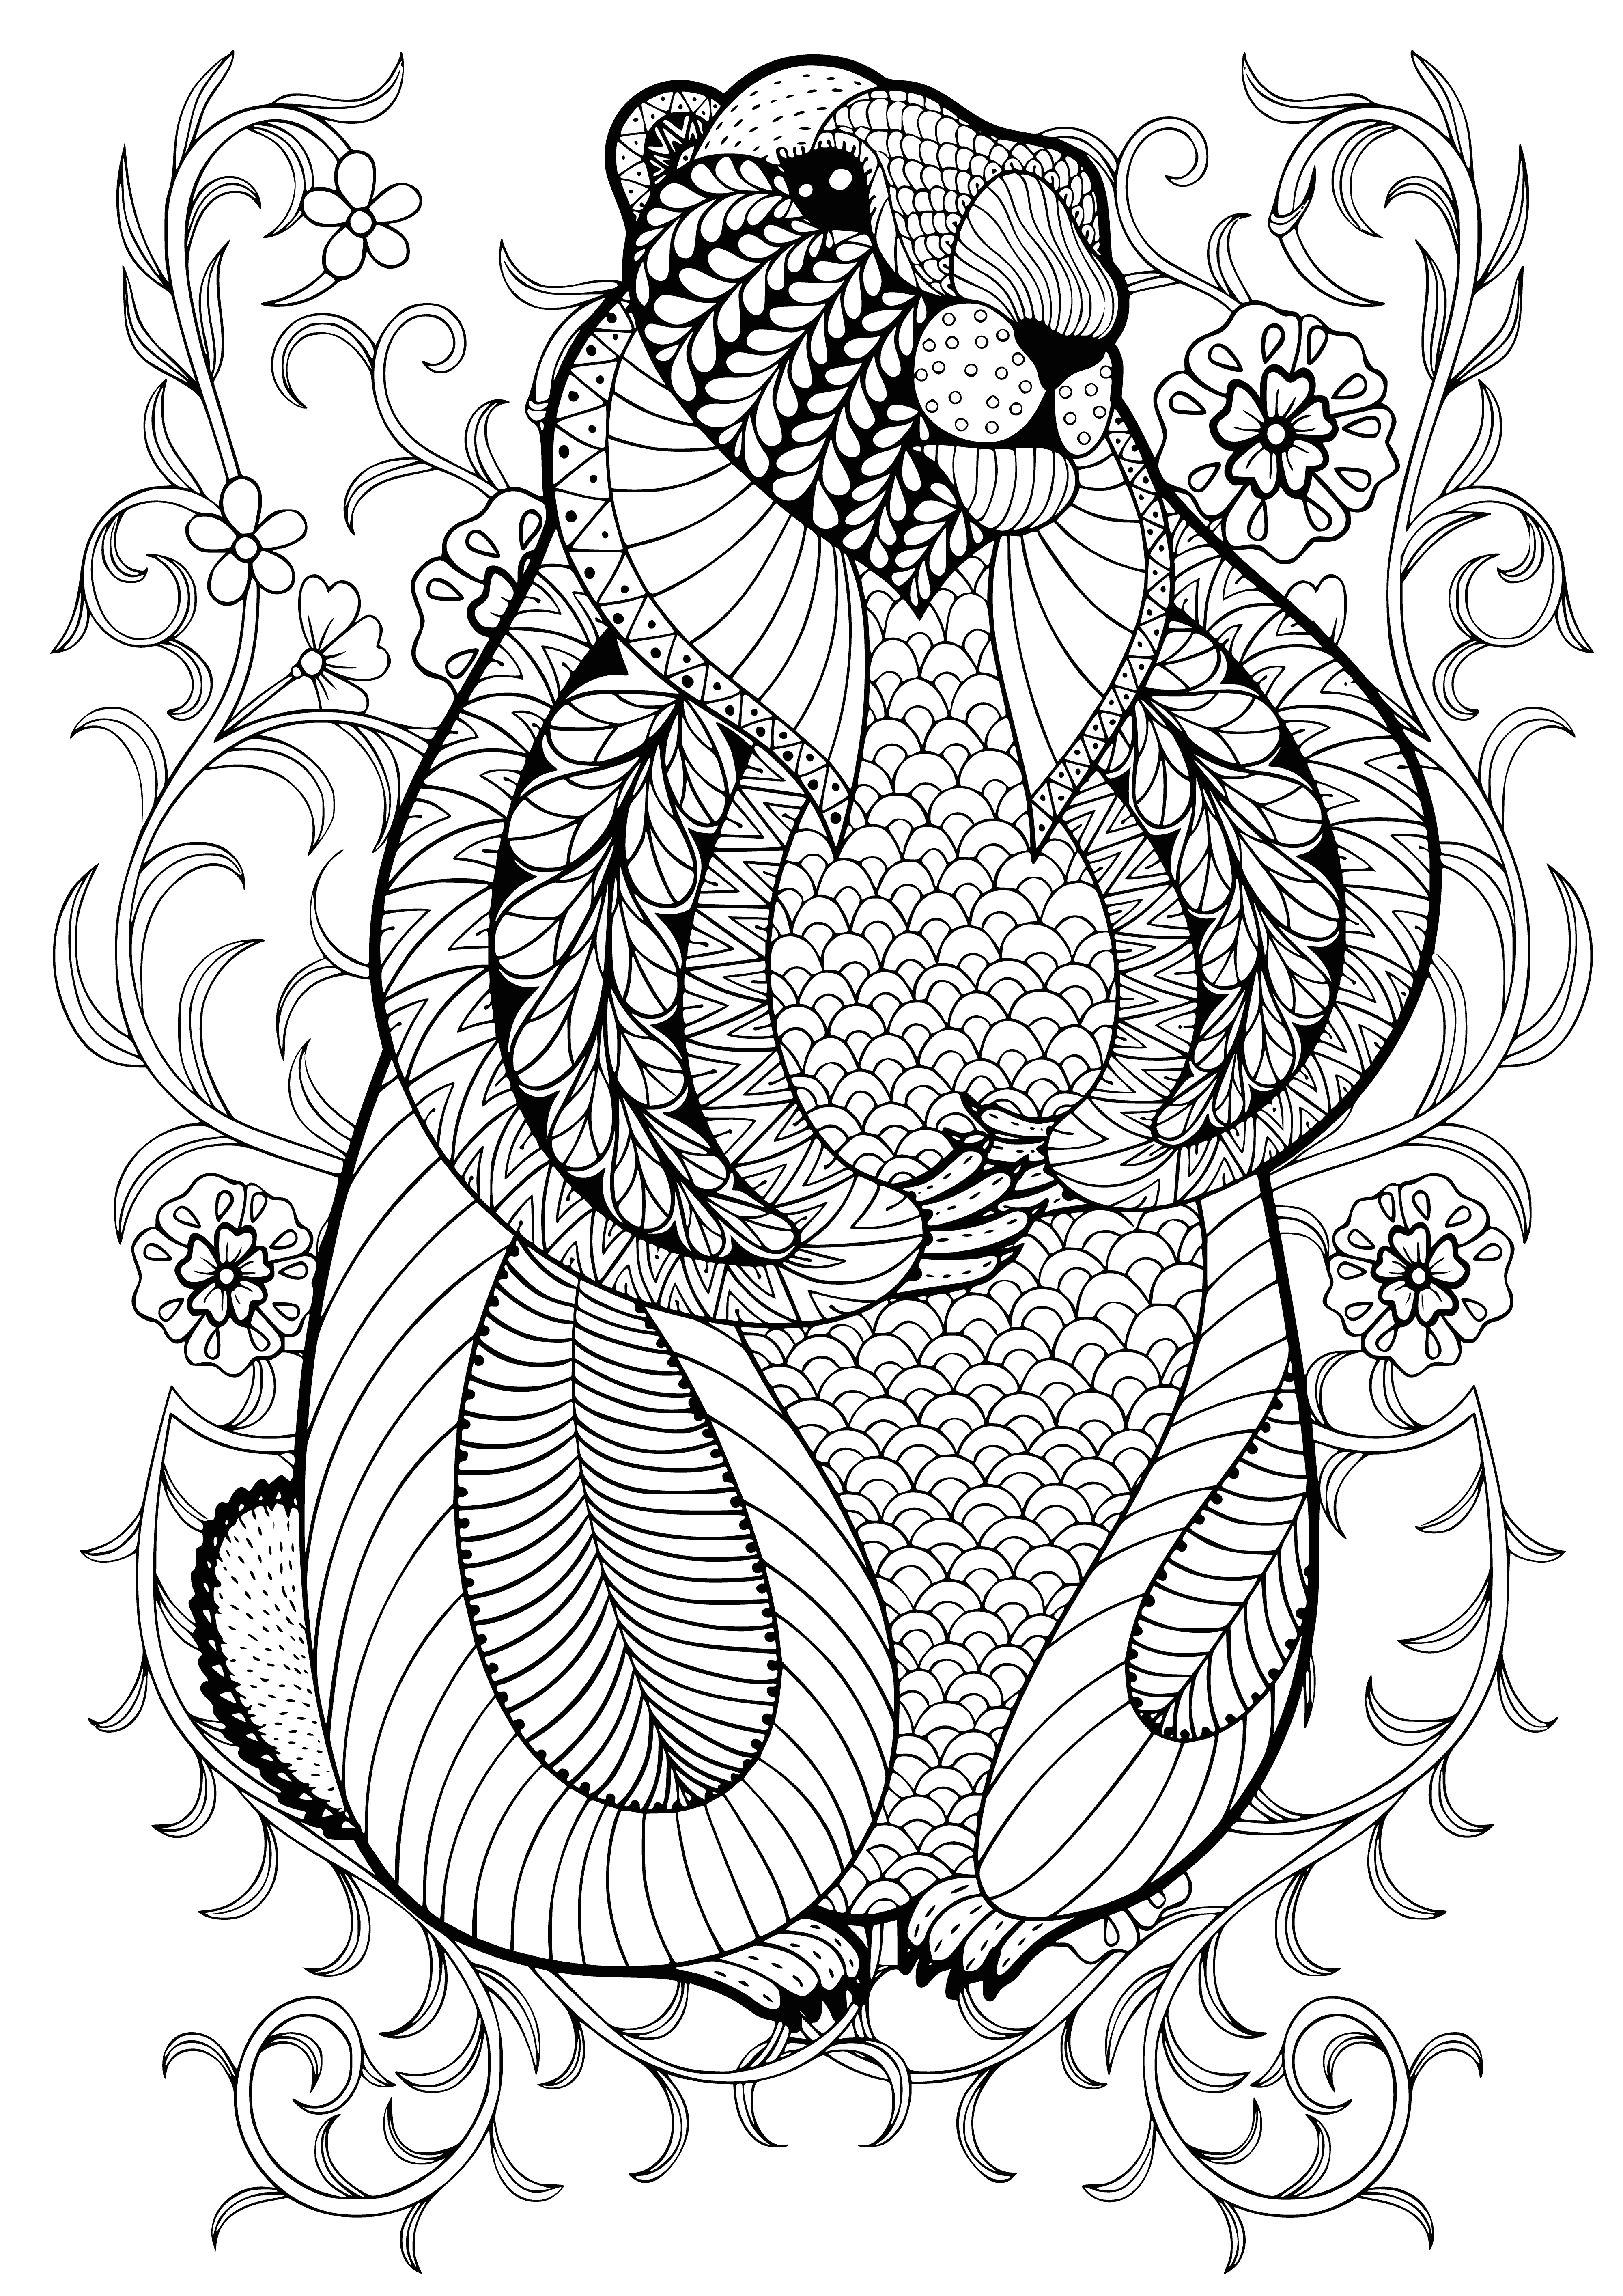 coloring page: A marmot sits on a hill surrounded by trees and flowers, looking up at the sky with a large nose. #AntistressAnimals